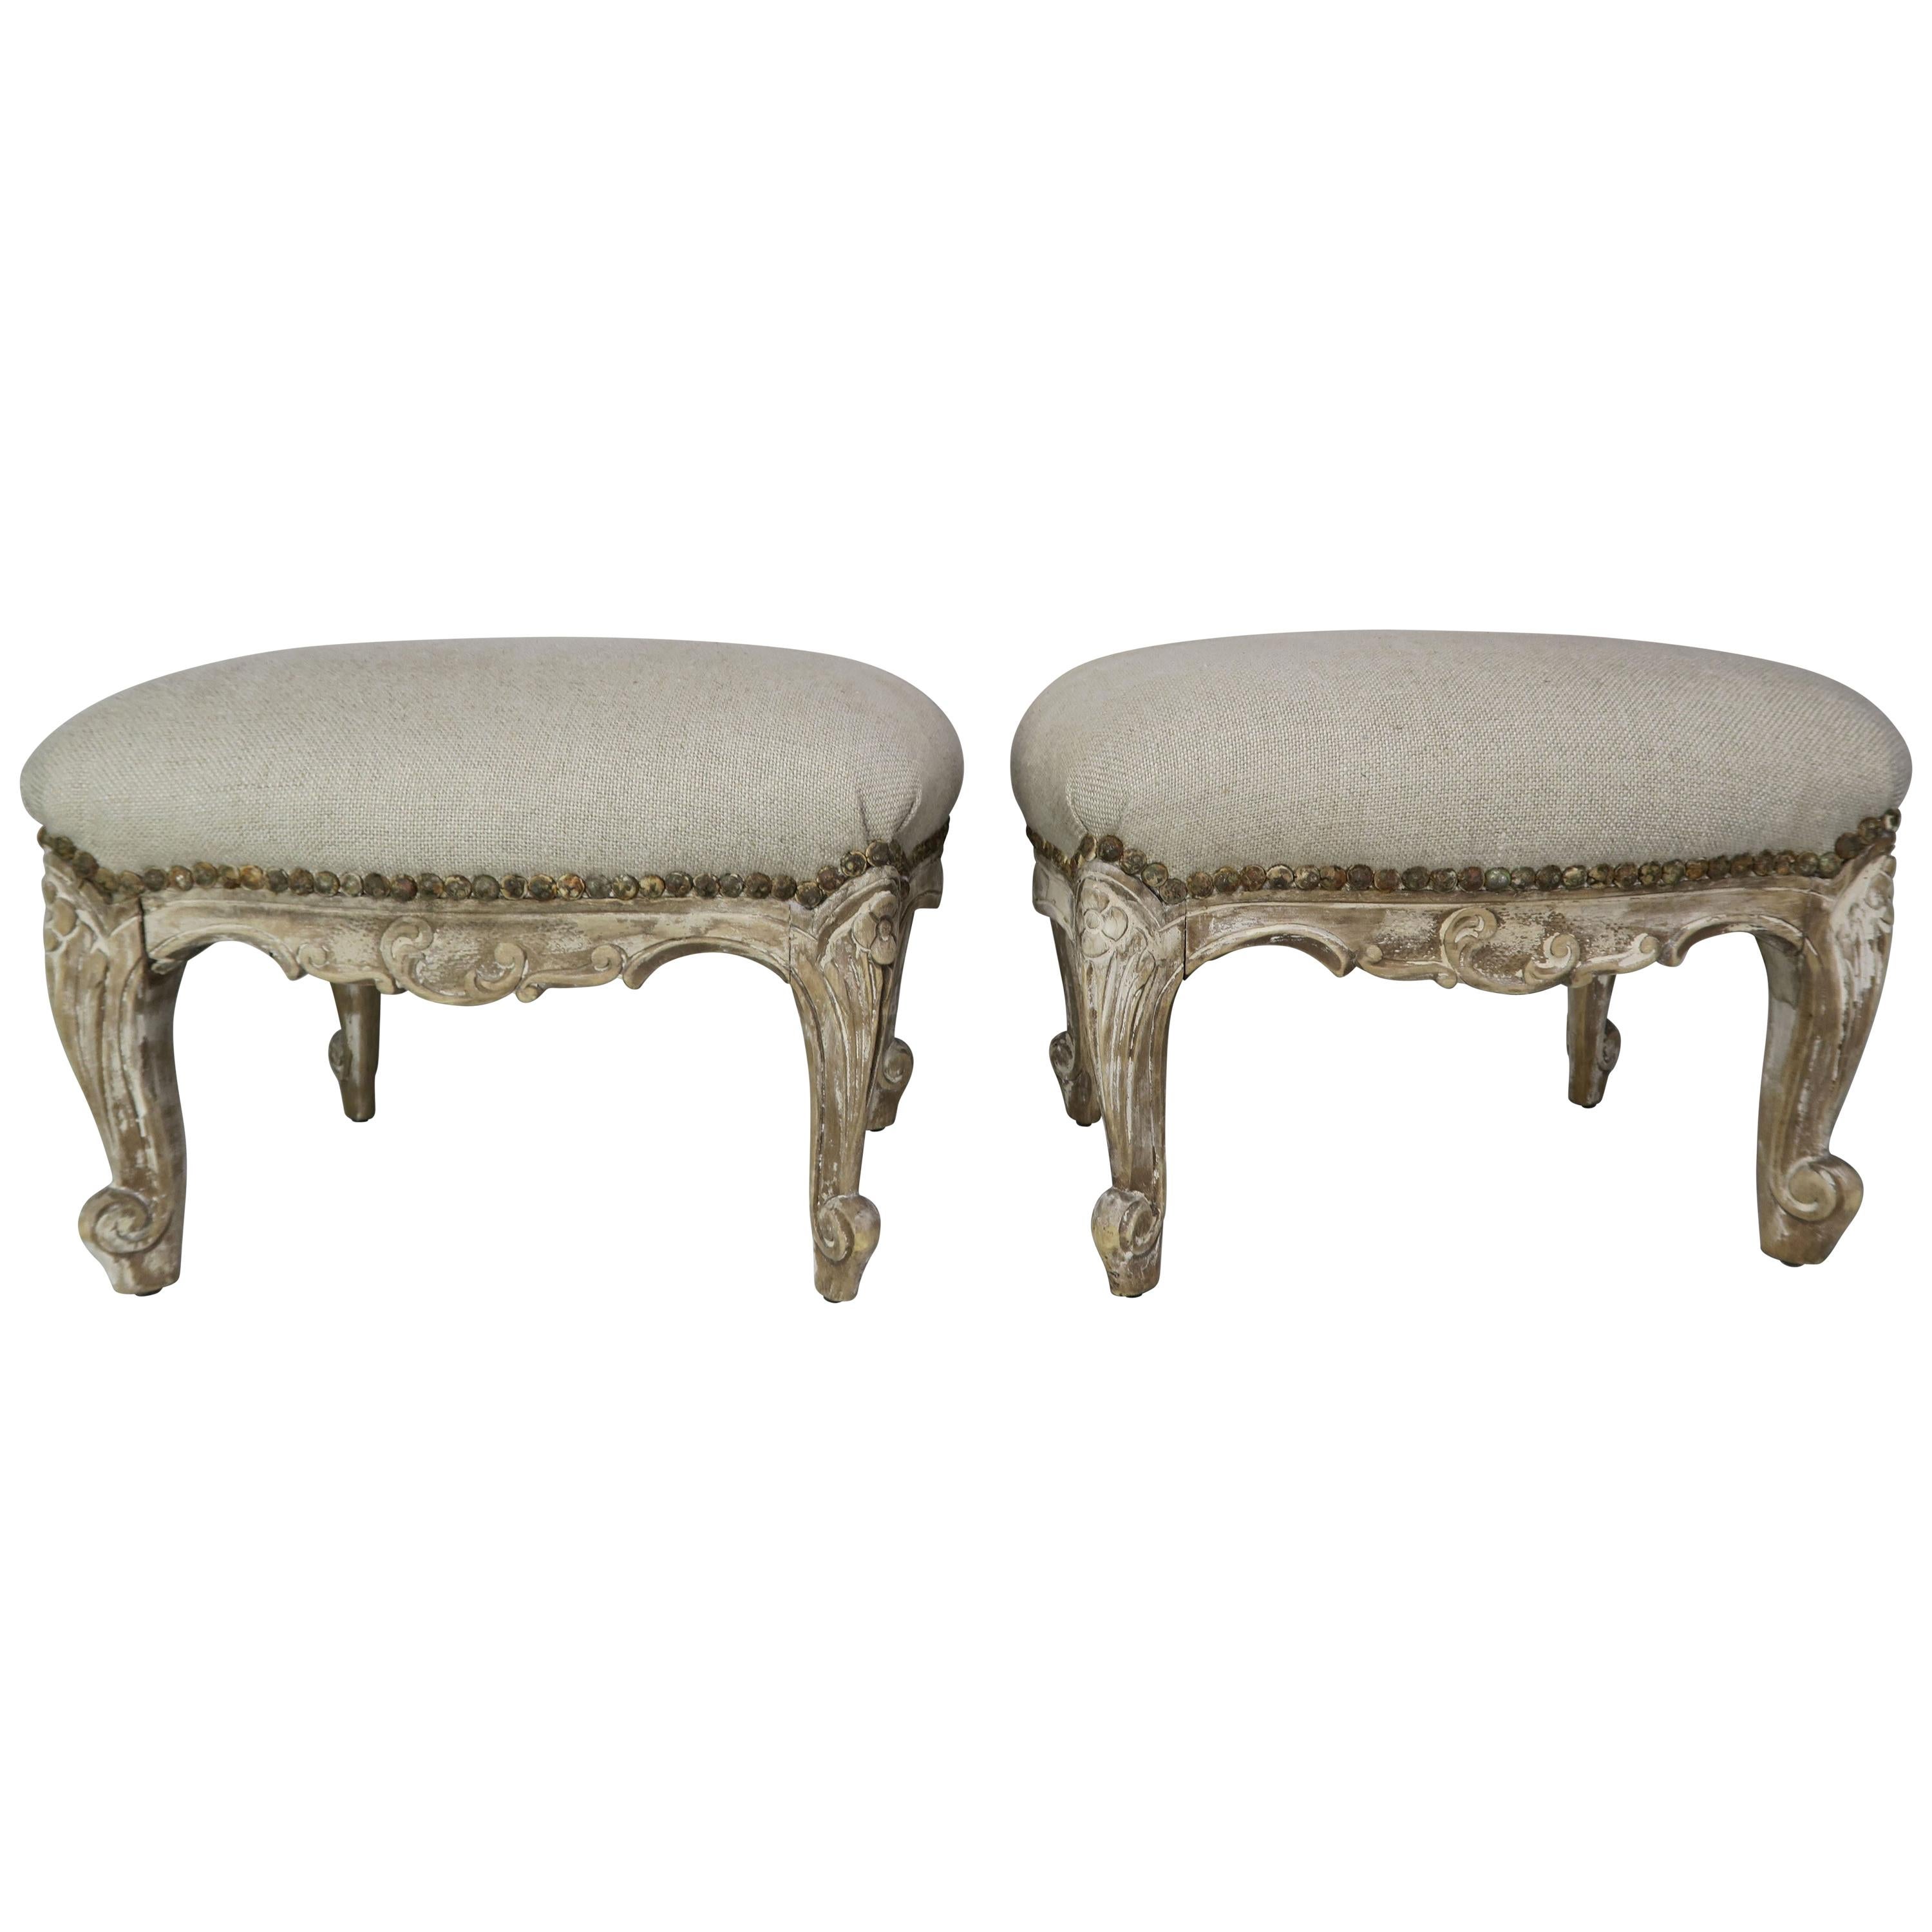 19th Century French Painted Benches/Footstools, Pair